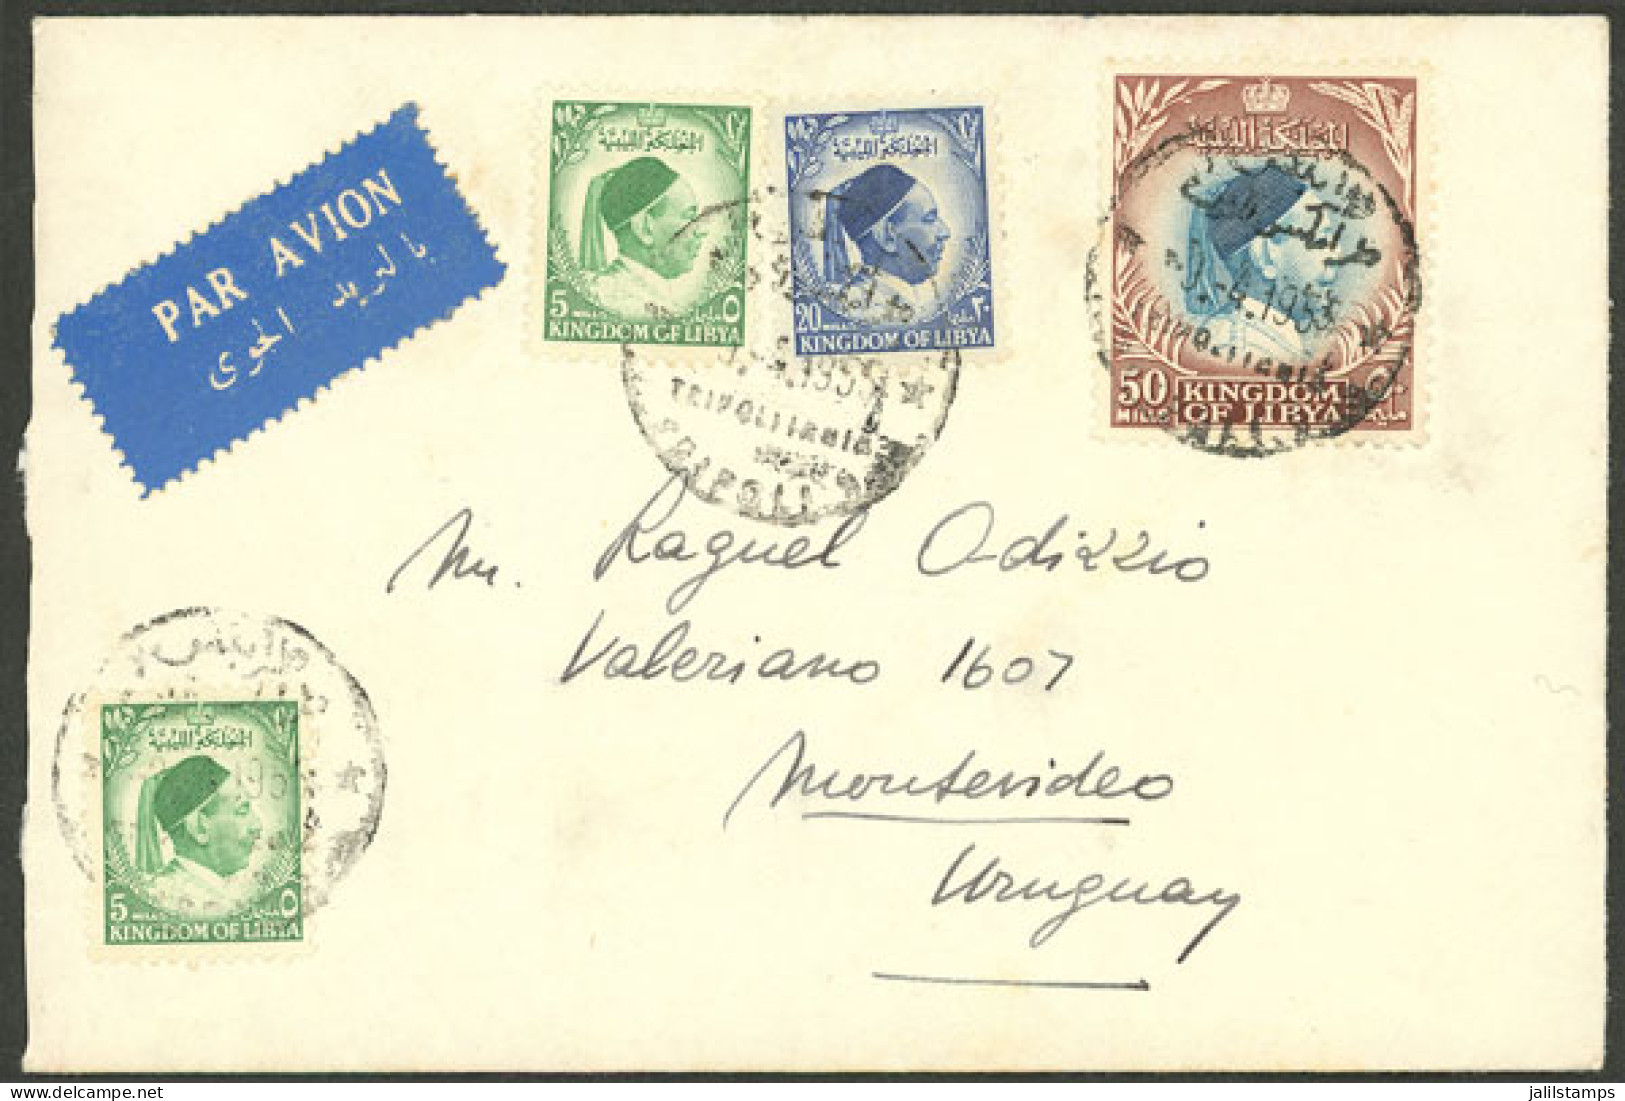 LIBYA: Airmail Cover Sent From Tripoli To Uruguay On 9/AP/1955, VF Quality! - Libia